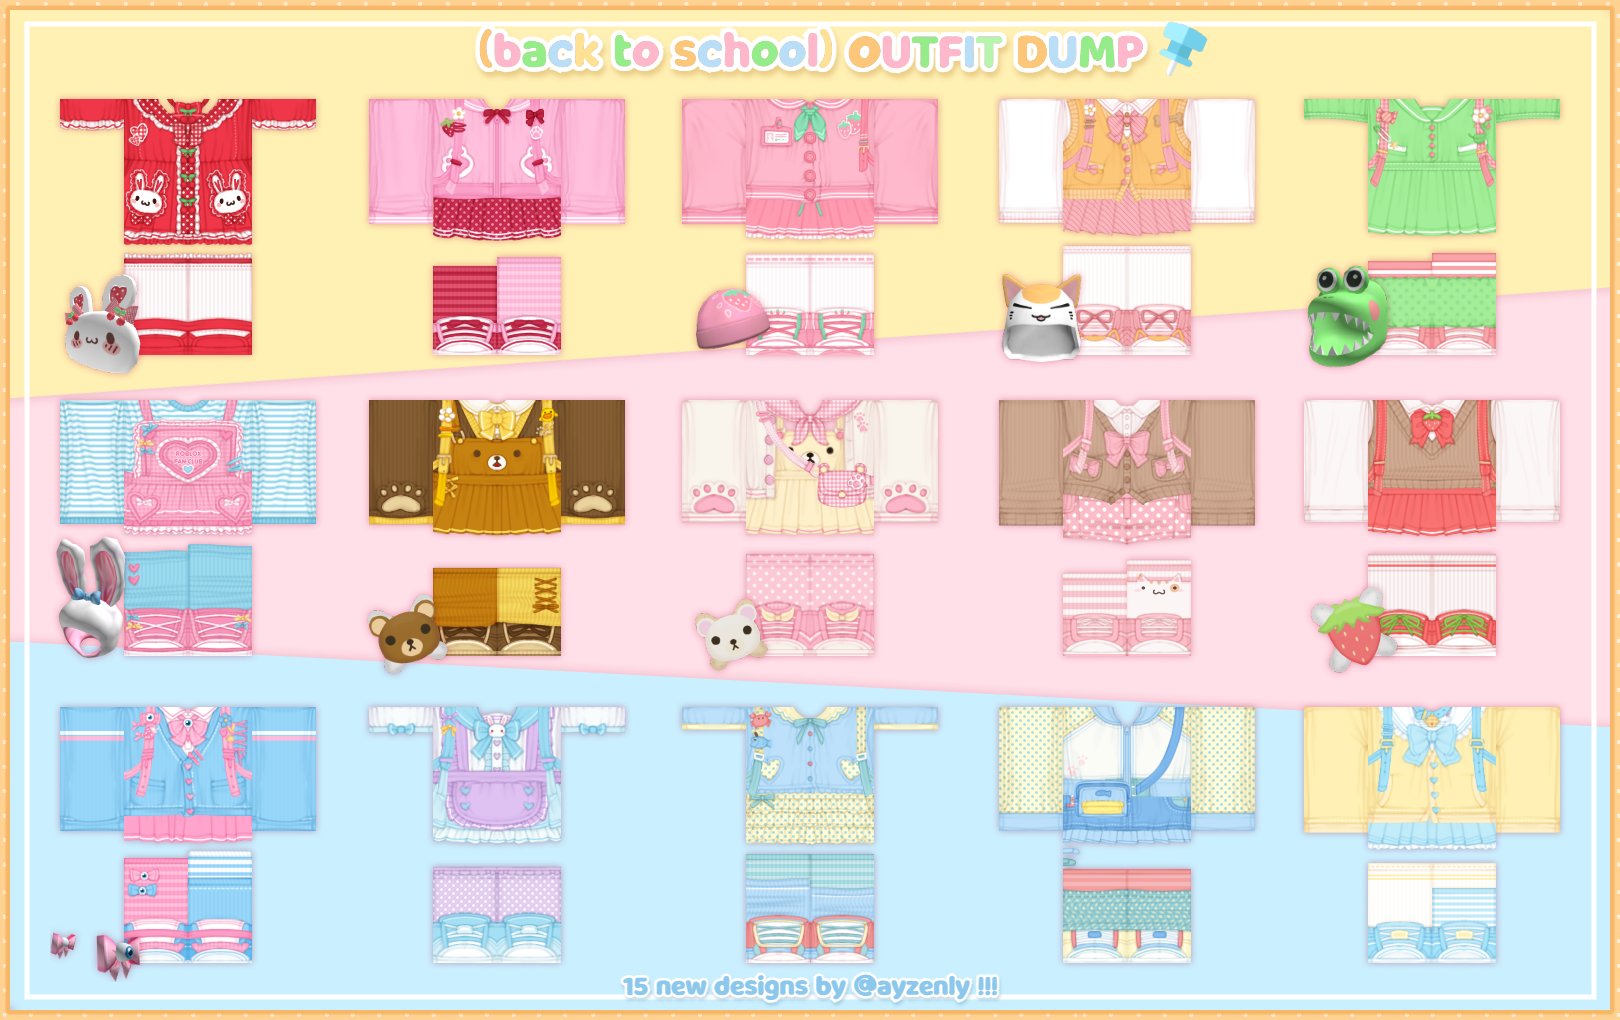 aimi on X: NEW FIT @ FAIRYLAND!! --links in thread likes n